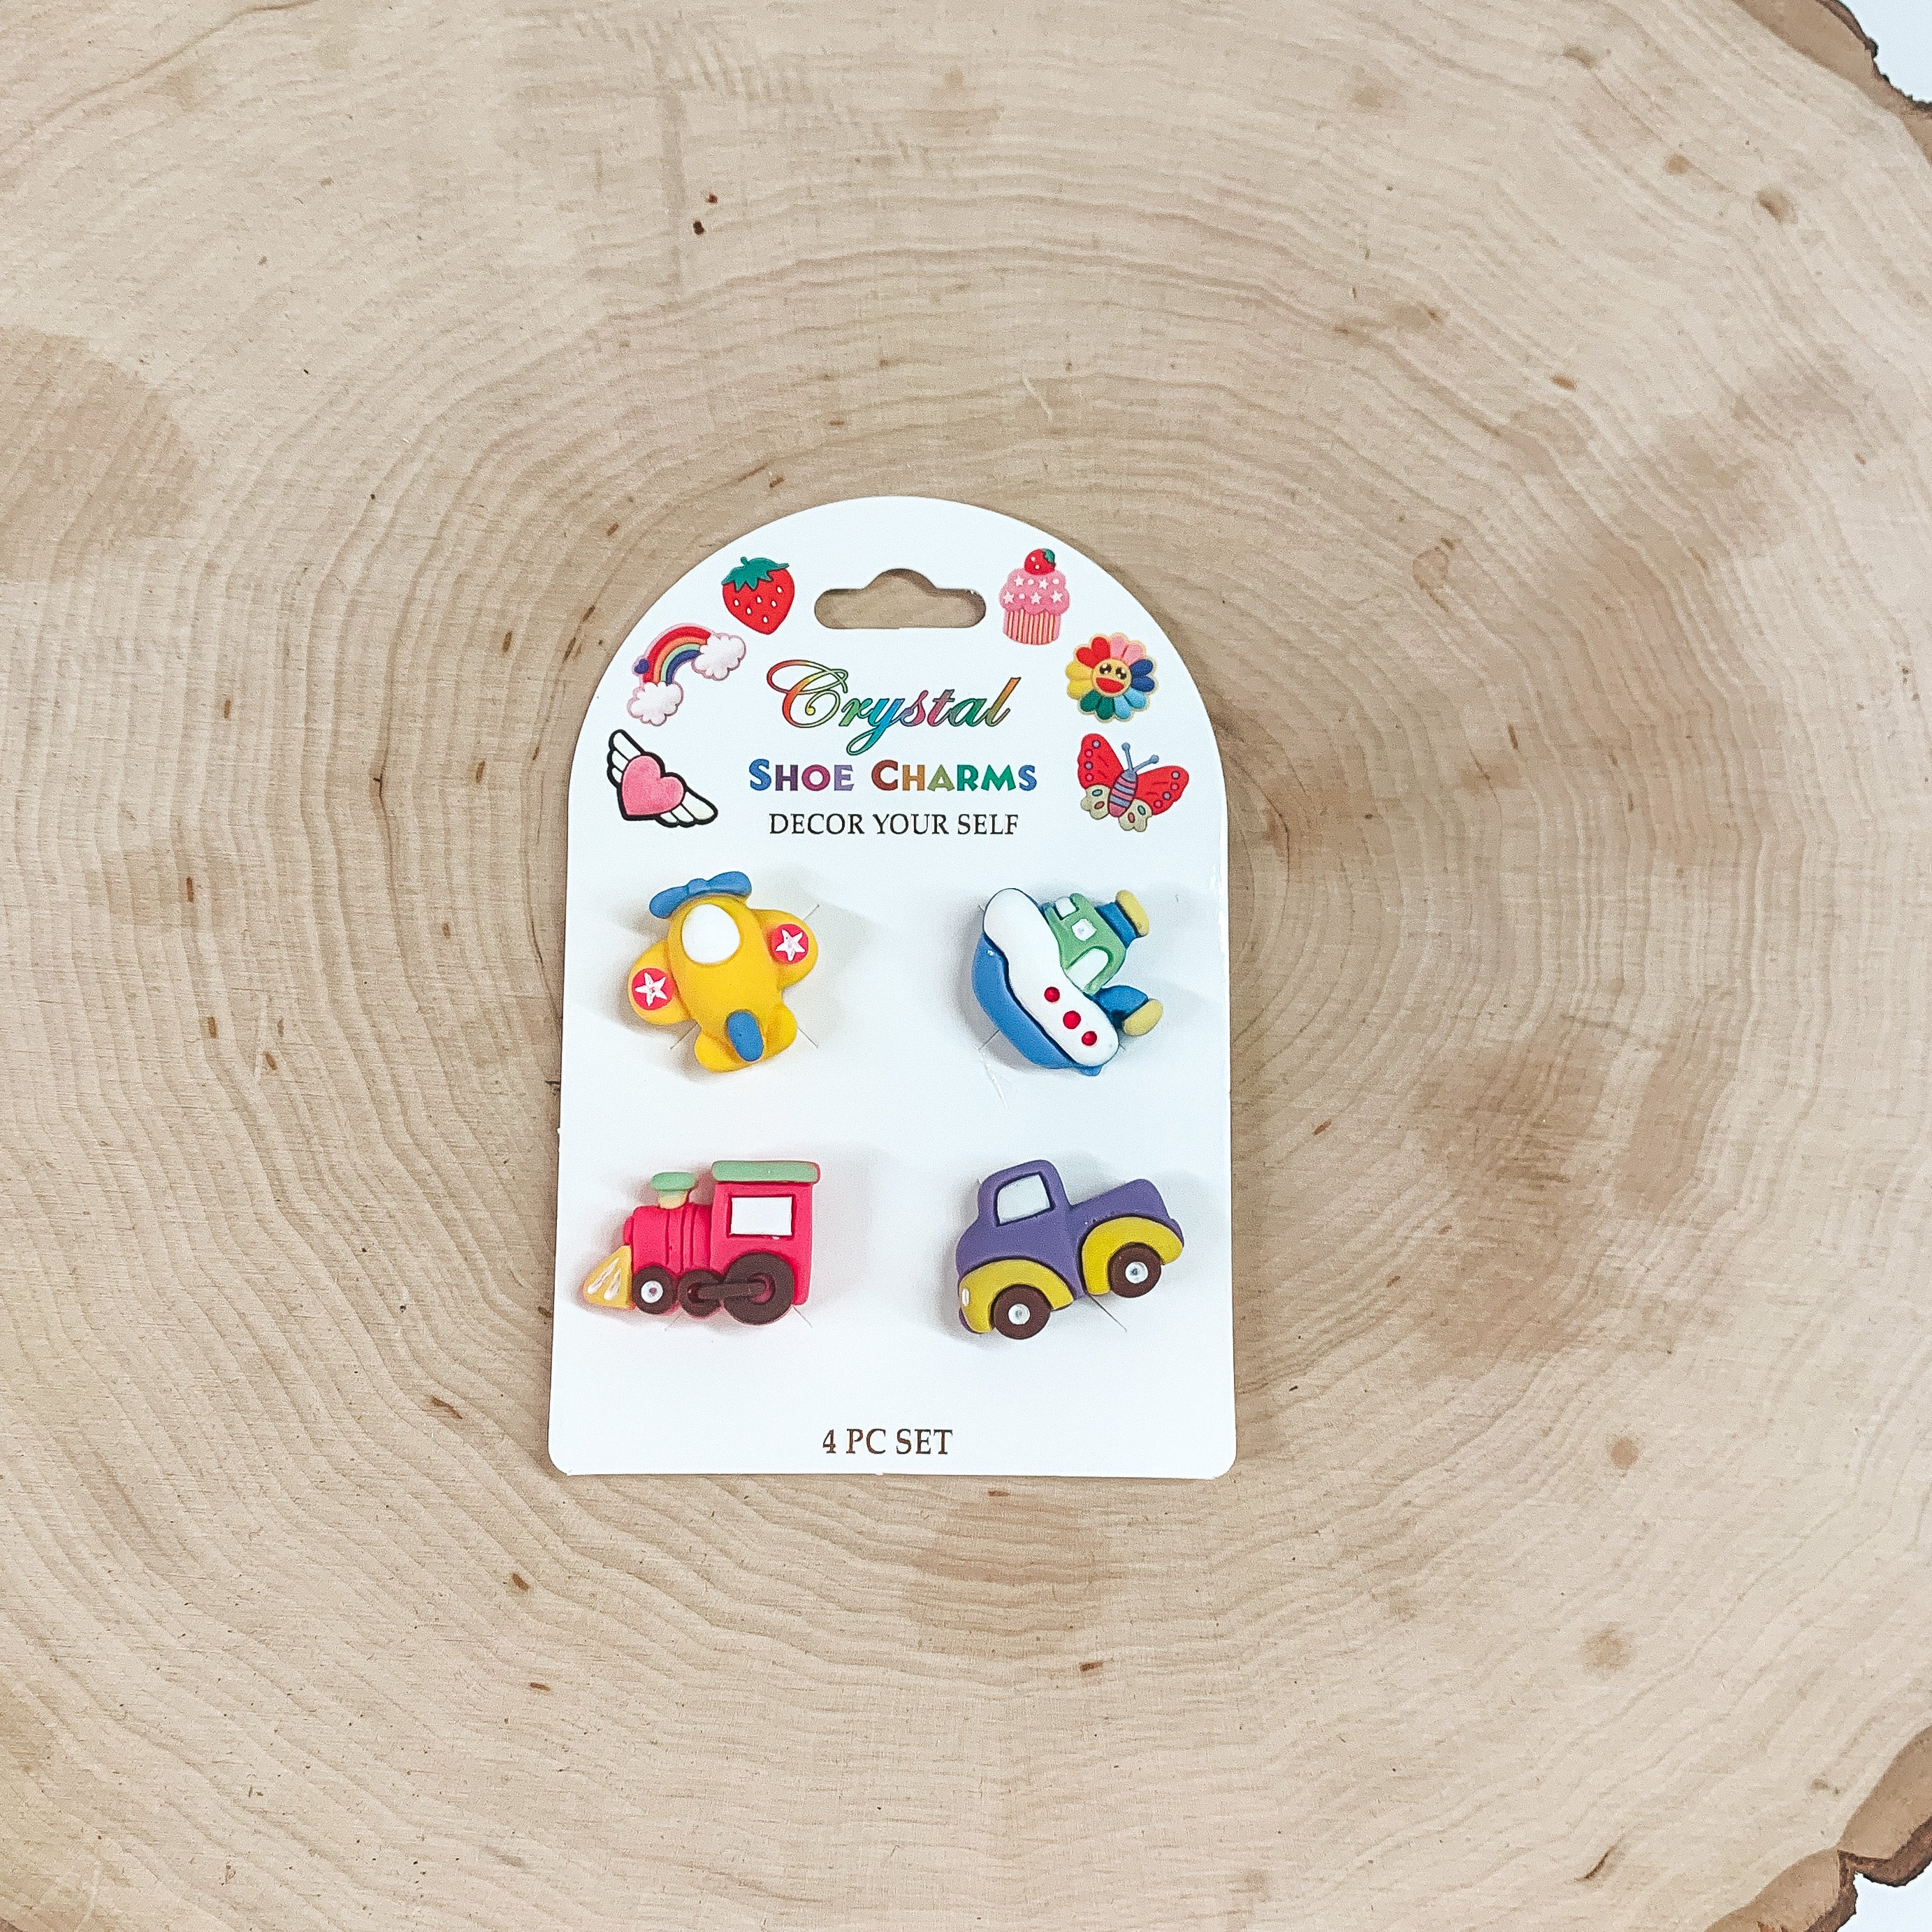 This is a pack of four small shoe charms in different colors and figures such as a plane, boat, train, and truck. These shoe charms are placed on a white card and taken on a slab of wood.